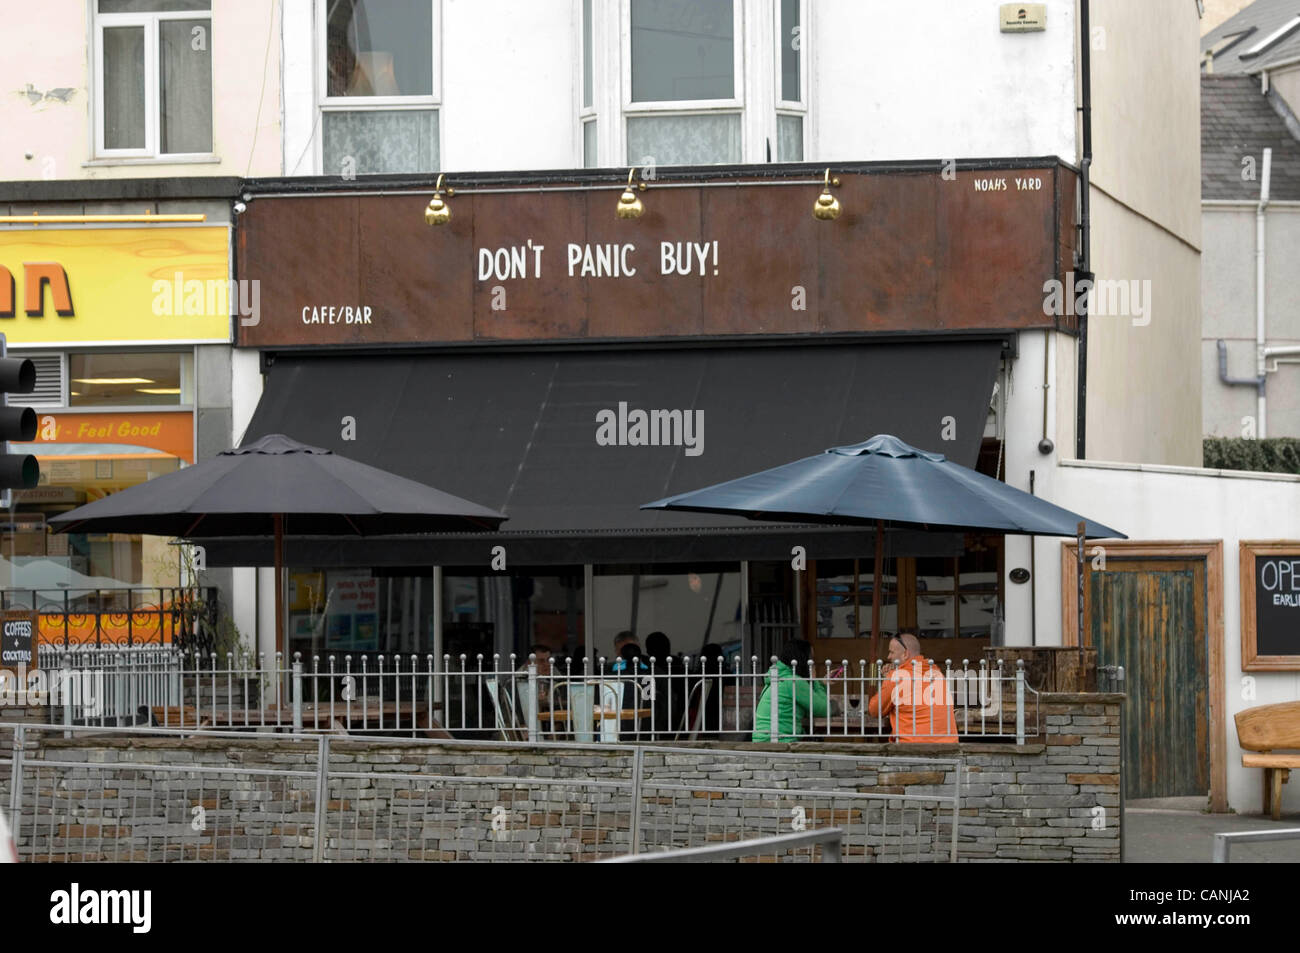 Swansea, UK. 31 Mar, 2012. Sign above Noah's Yard bar in the Uplands district of Swansea saying 'Don't Panic Buy' in reference to the fuel crisis. Stock Photo